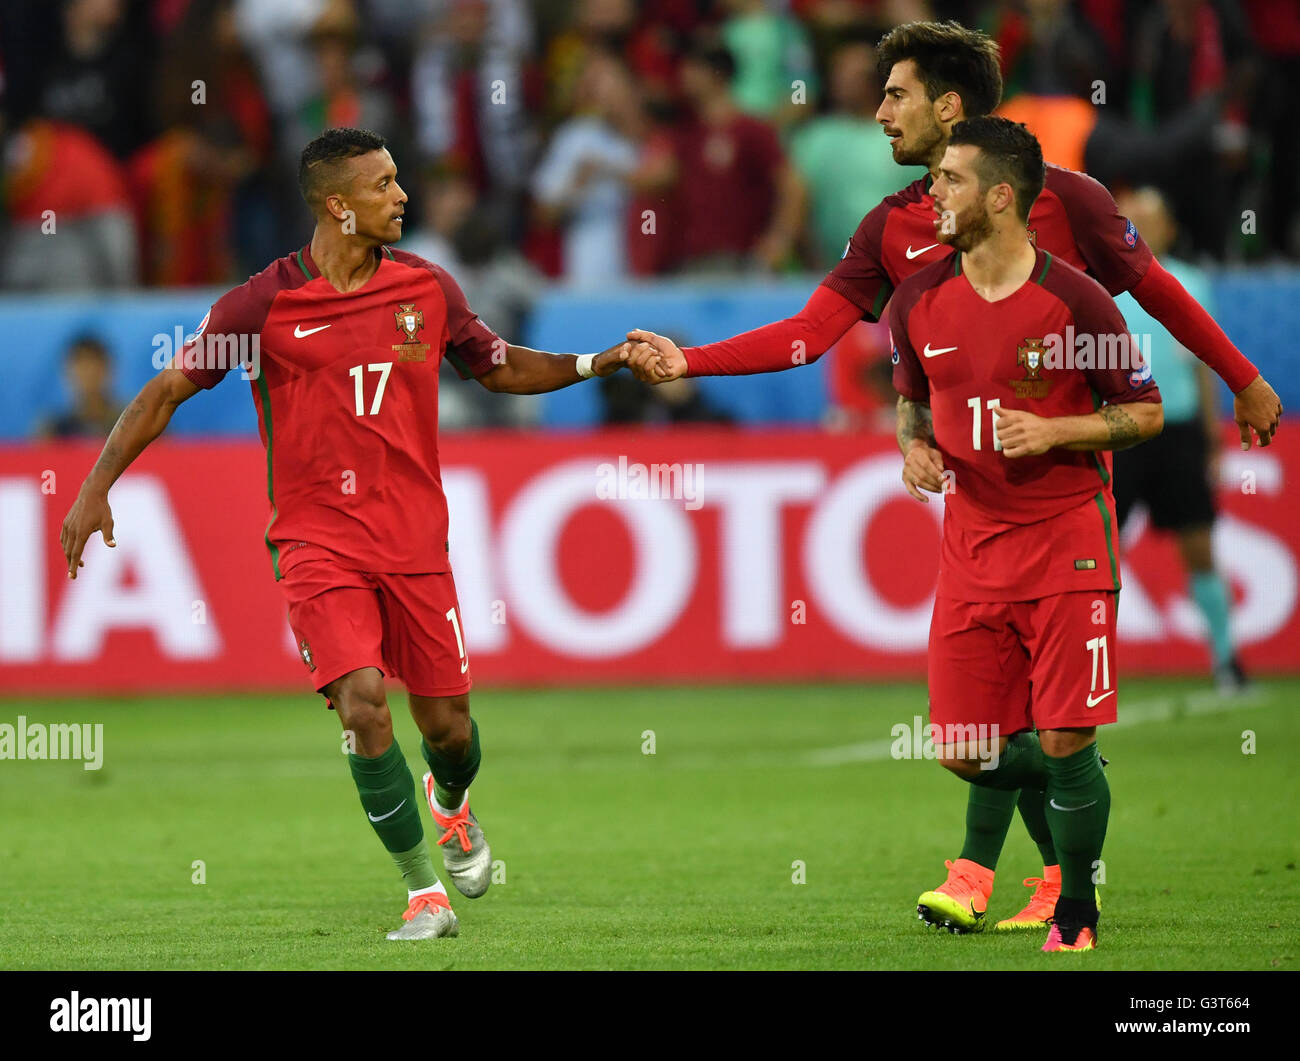 Saint-Etienne, France. 14th June, 2016. Nani (L) of Portugal celebrates after scoring the leading goal with teammate Andre Gomes and Vieirinha (R) during the UEFA Euro 2016 Group F soccer match Portugal vs. Iceland at Stade Geoffroy Guichard in Saint-Etienne, France, 14 June 2016. At left dejected Birkir Bjarnason of Iceland. Photo: Uwe Anspach/dpa/Alamy Live News Stock Photo